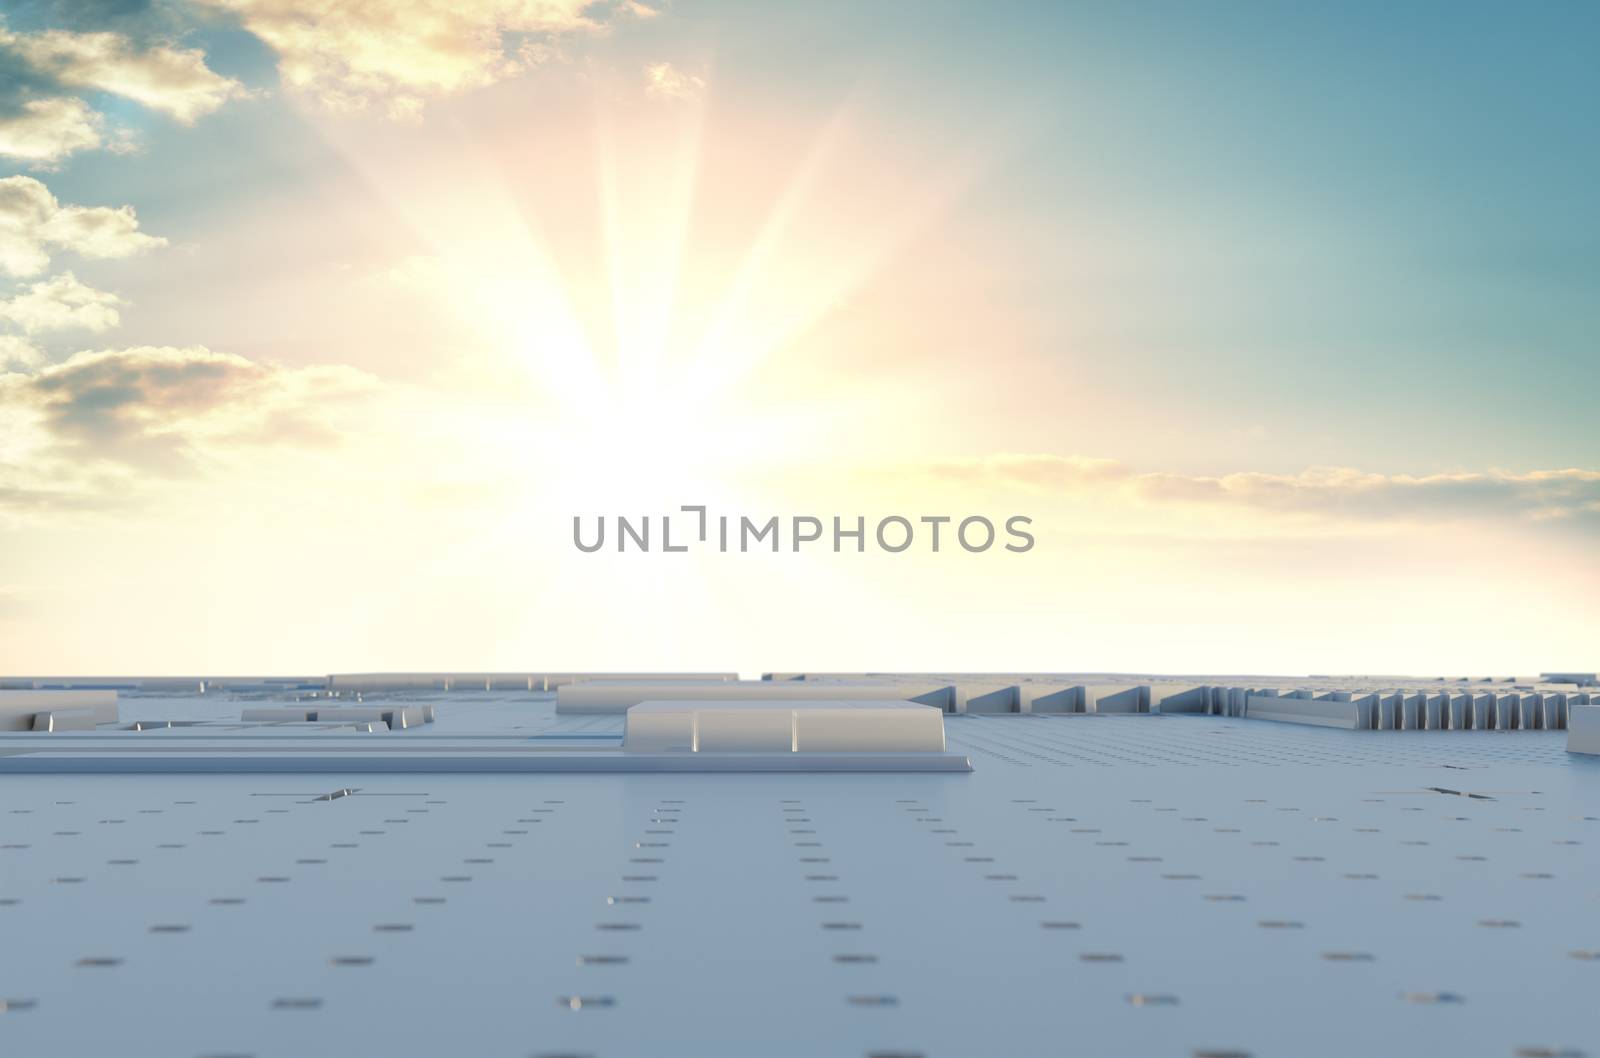 Abstract futuristic surface of a spaceship against the backdrop of dramatic sunset or sunrise. Beautiful background for your tech design. Cubes, reflection. 3D illustration